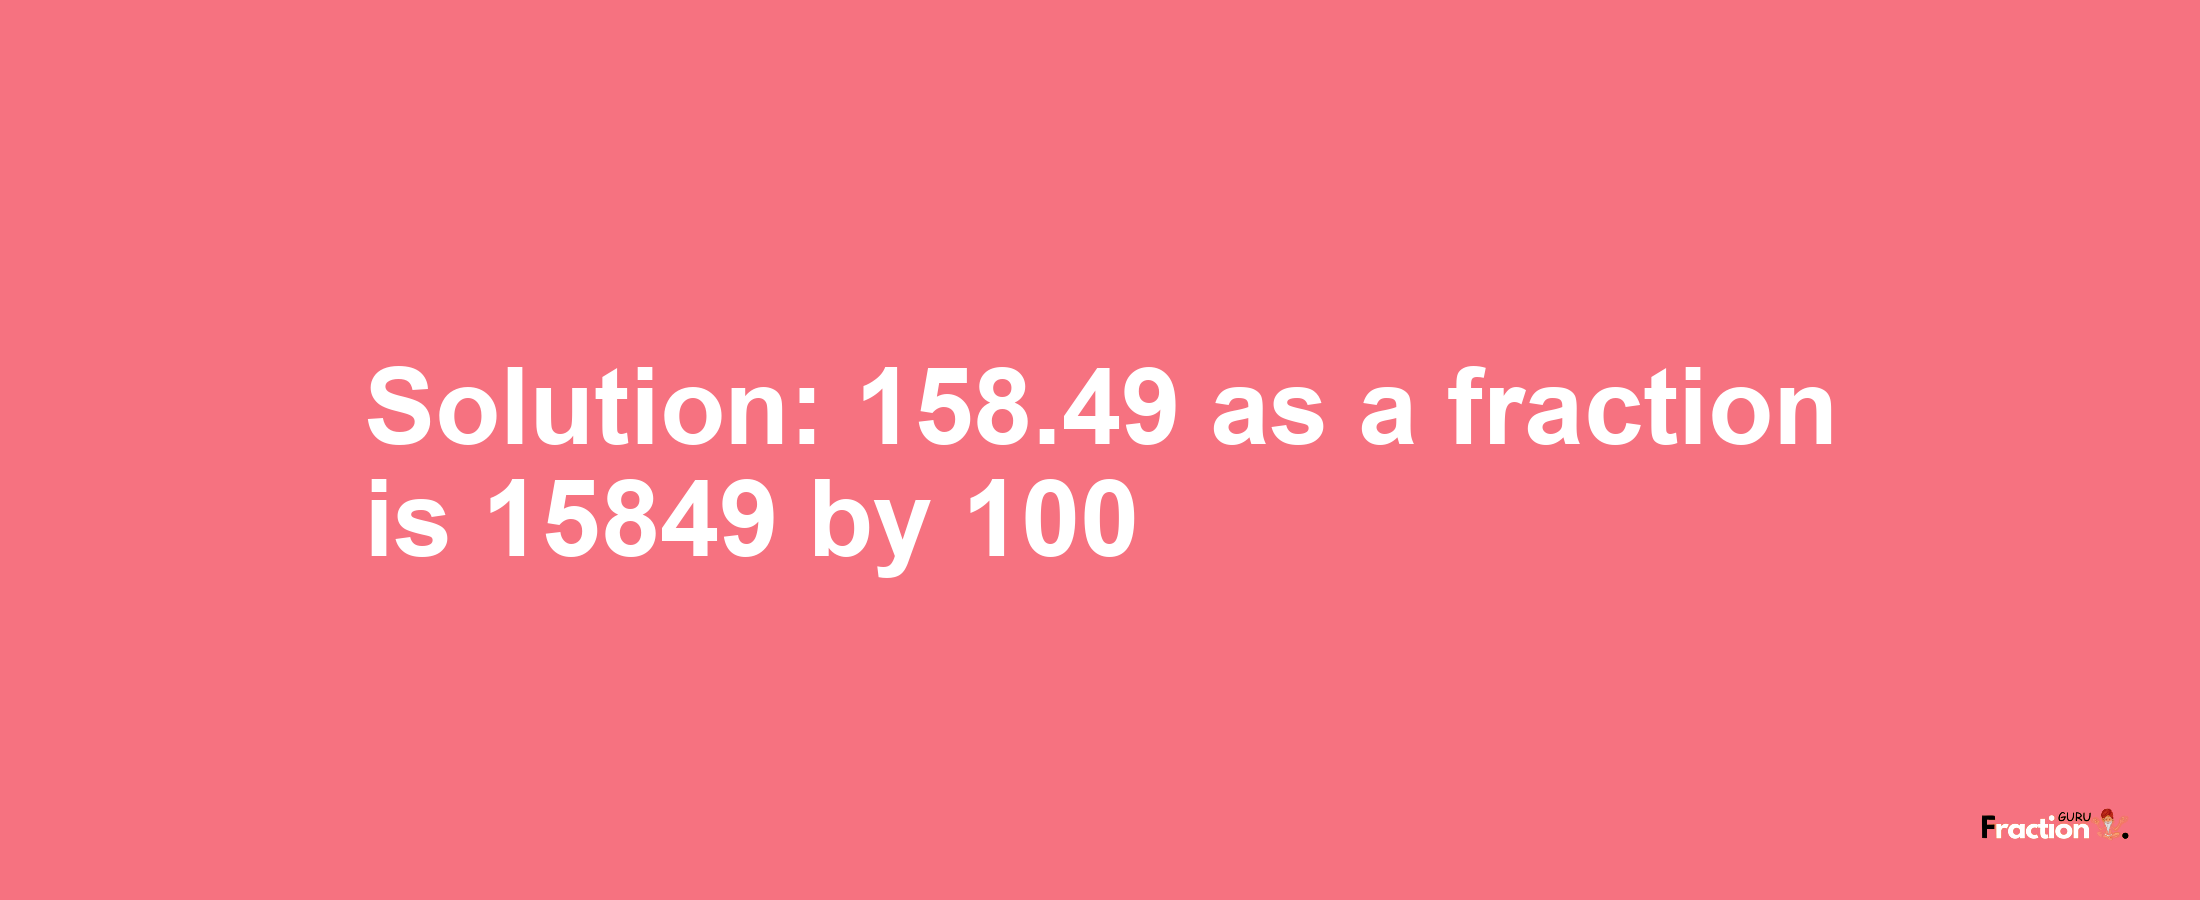 Solution:158.49 as a fraction is 15849/100